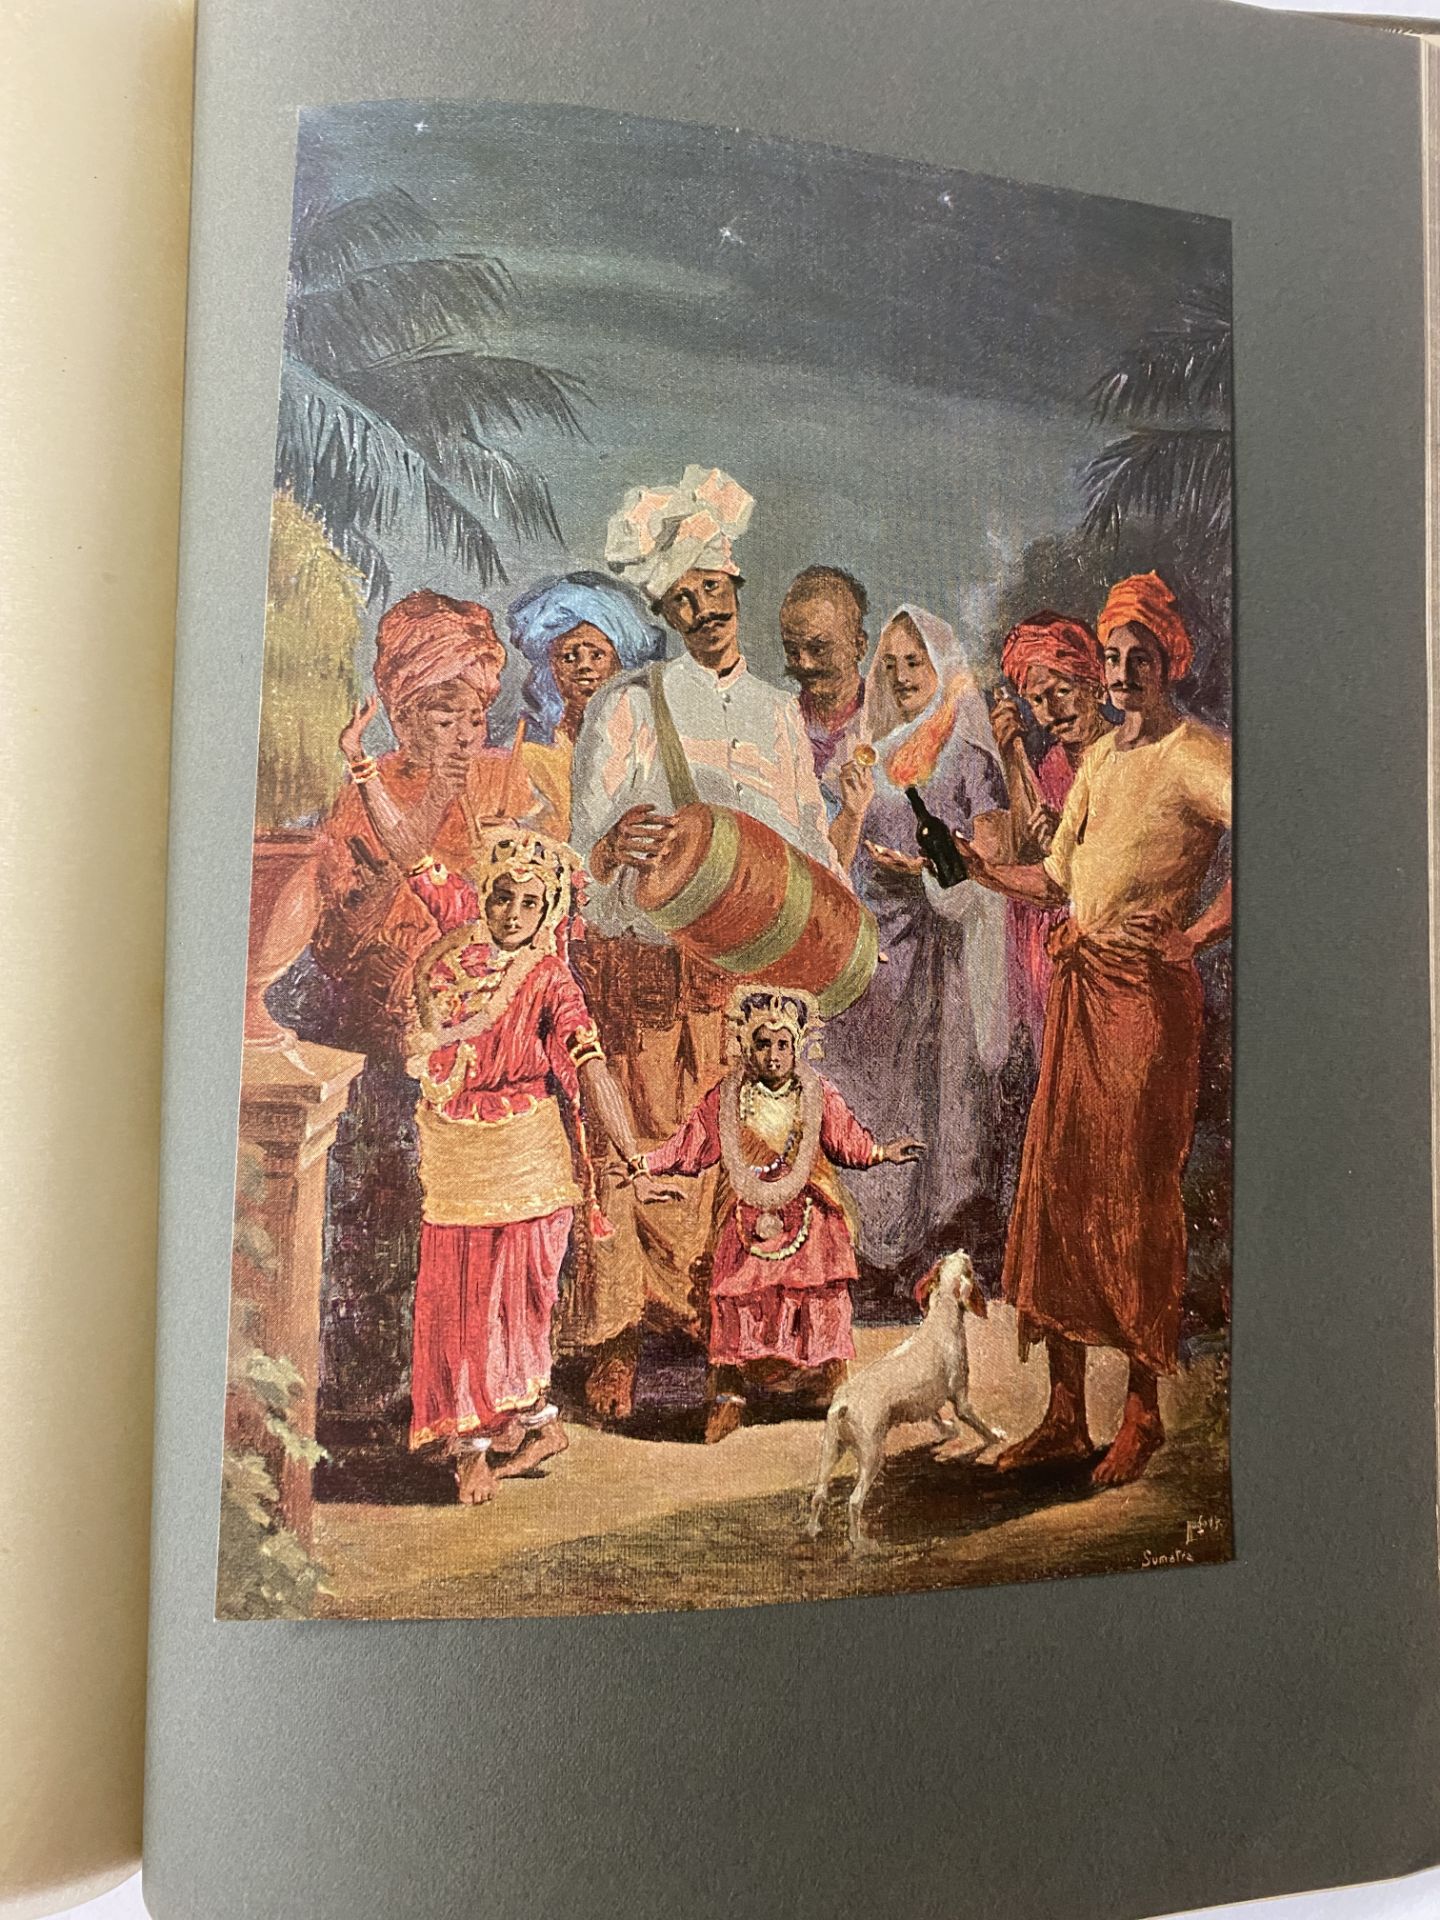 Art Reference Books on Asian Art - Indian - Image 3 of 8